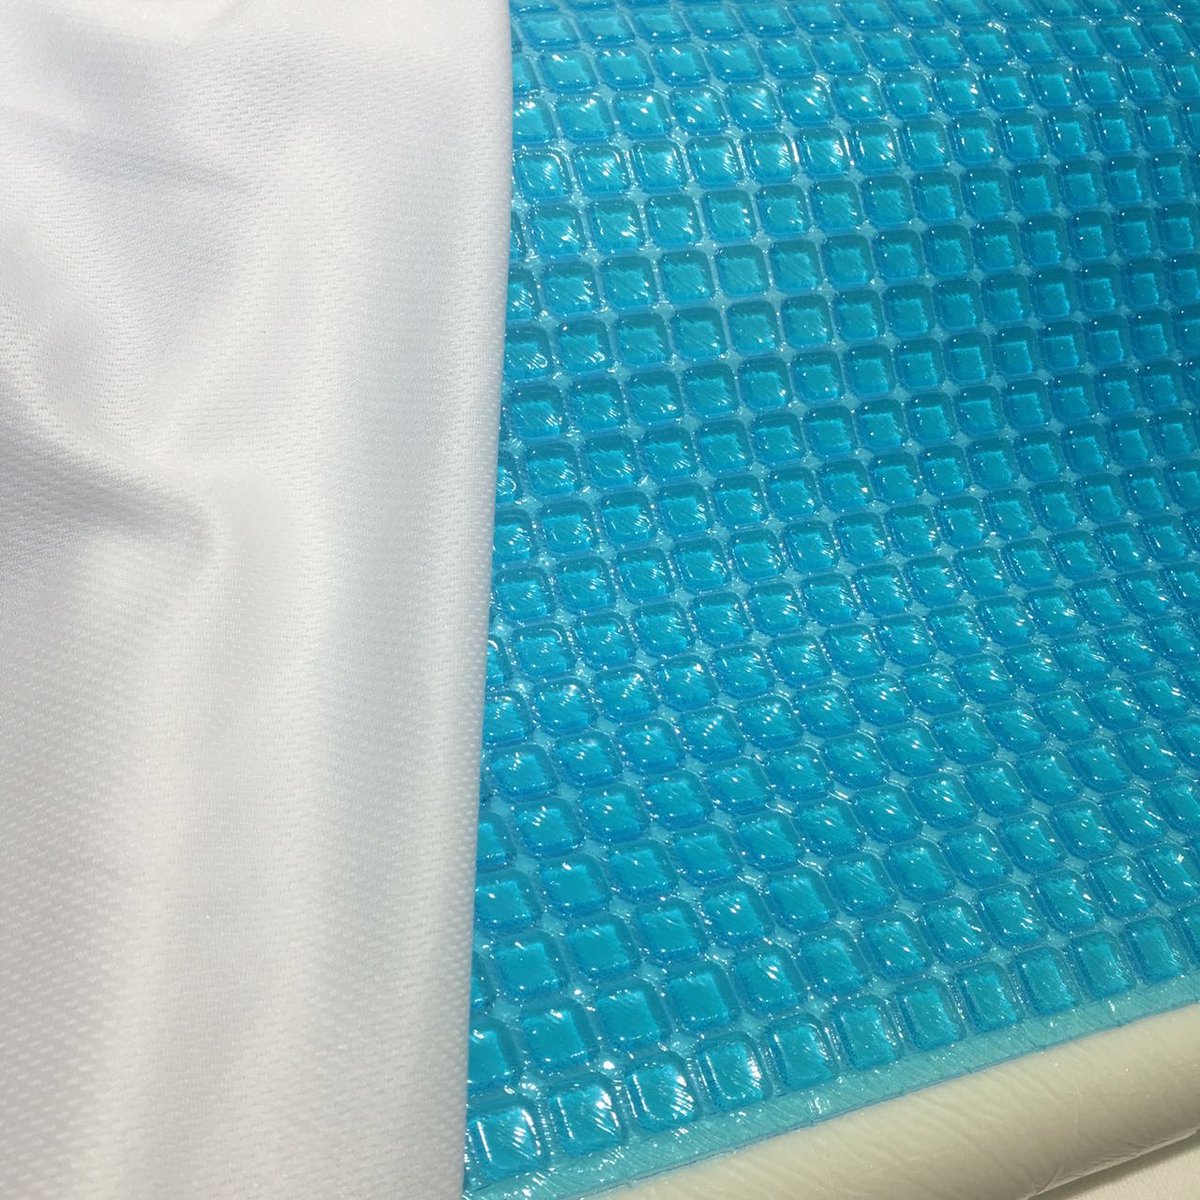 🌊 Stay cool this summer with our Cool Gel Wave Memory Foam Pillow! This isn't just any pillow - it features a cutting-edge design with beautiful massage cube gel ensuring optimal comfort and promoting excellent night’s sleep 
#wydenhome #Wydenpillow #MemoryFoamPillow